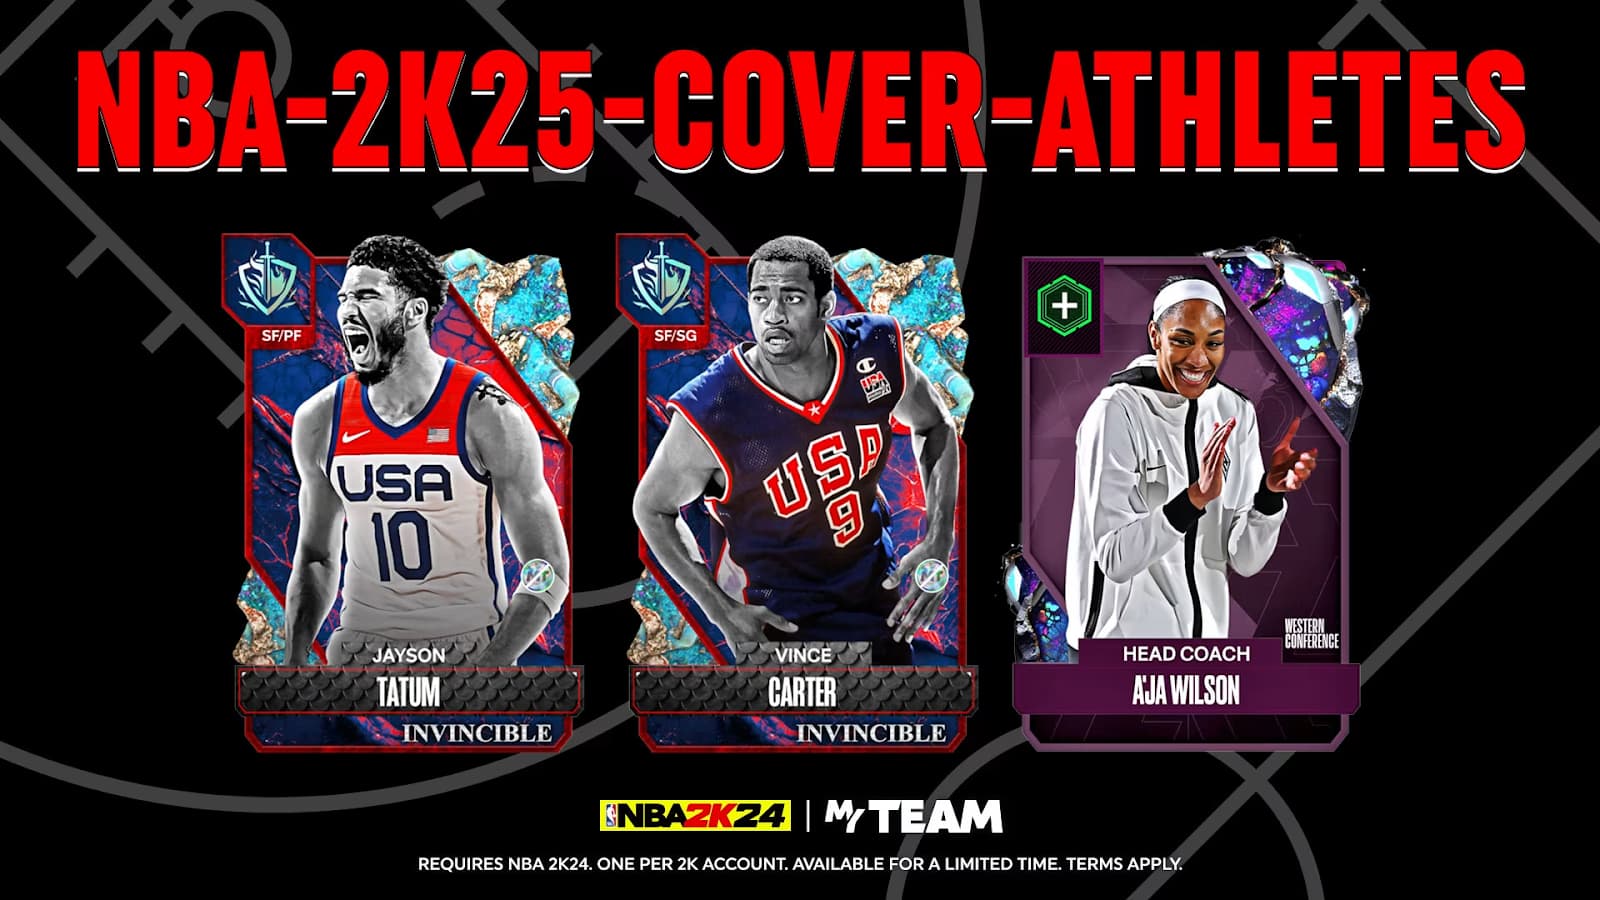 NBA 2K25 COVER ATHLETES | INVINCIBLE TEAM USA UPDATE